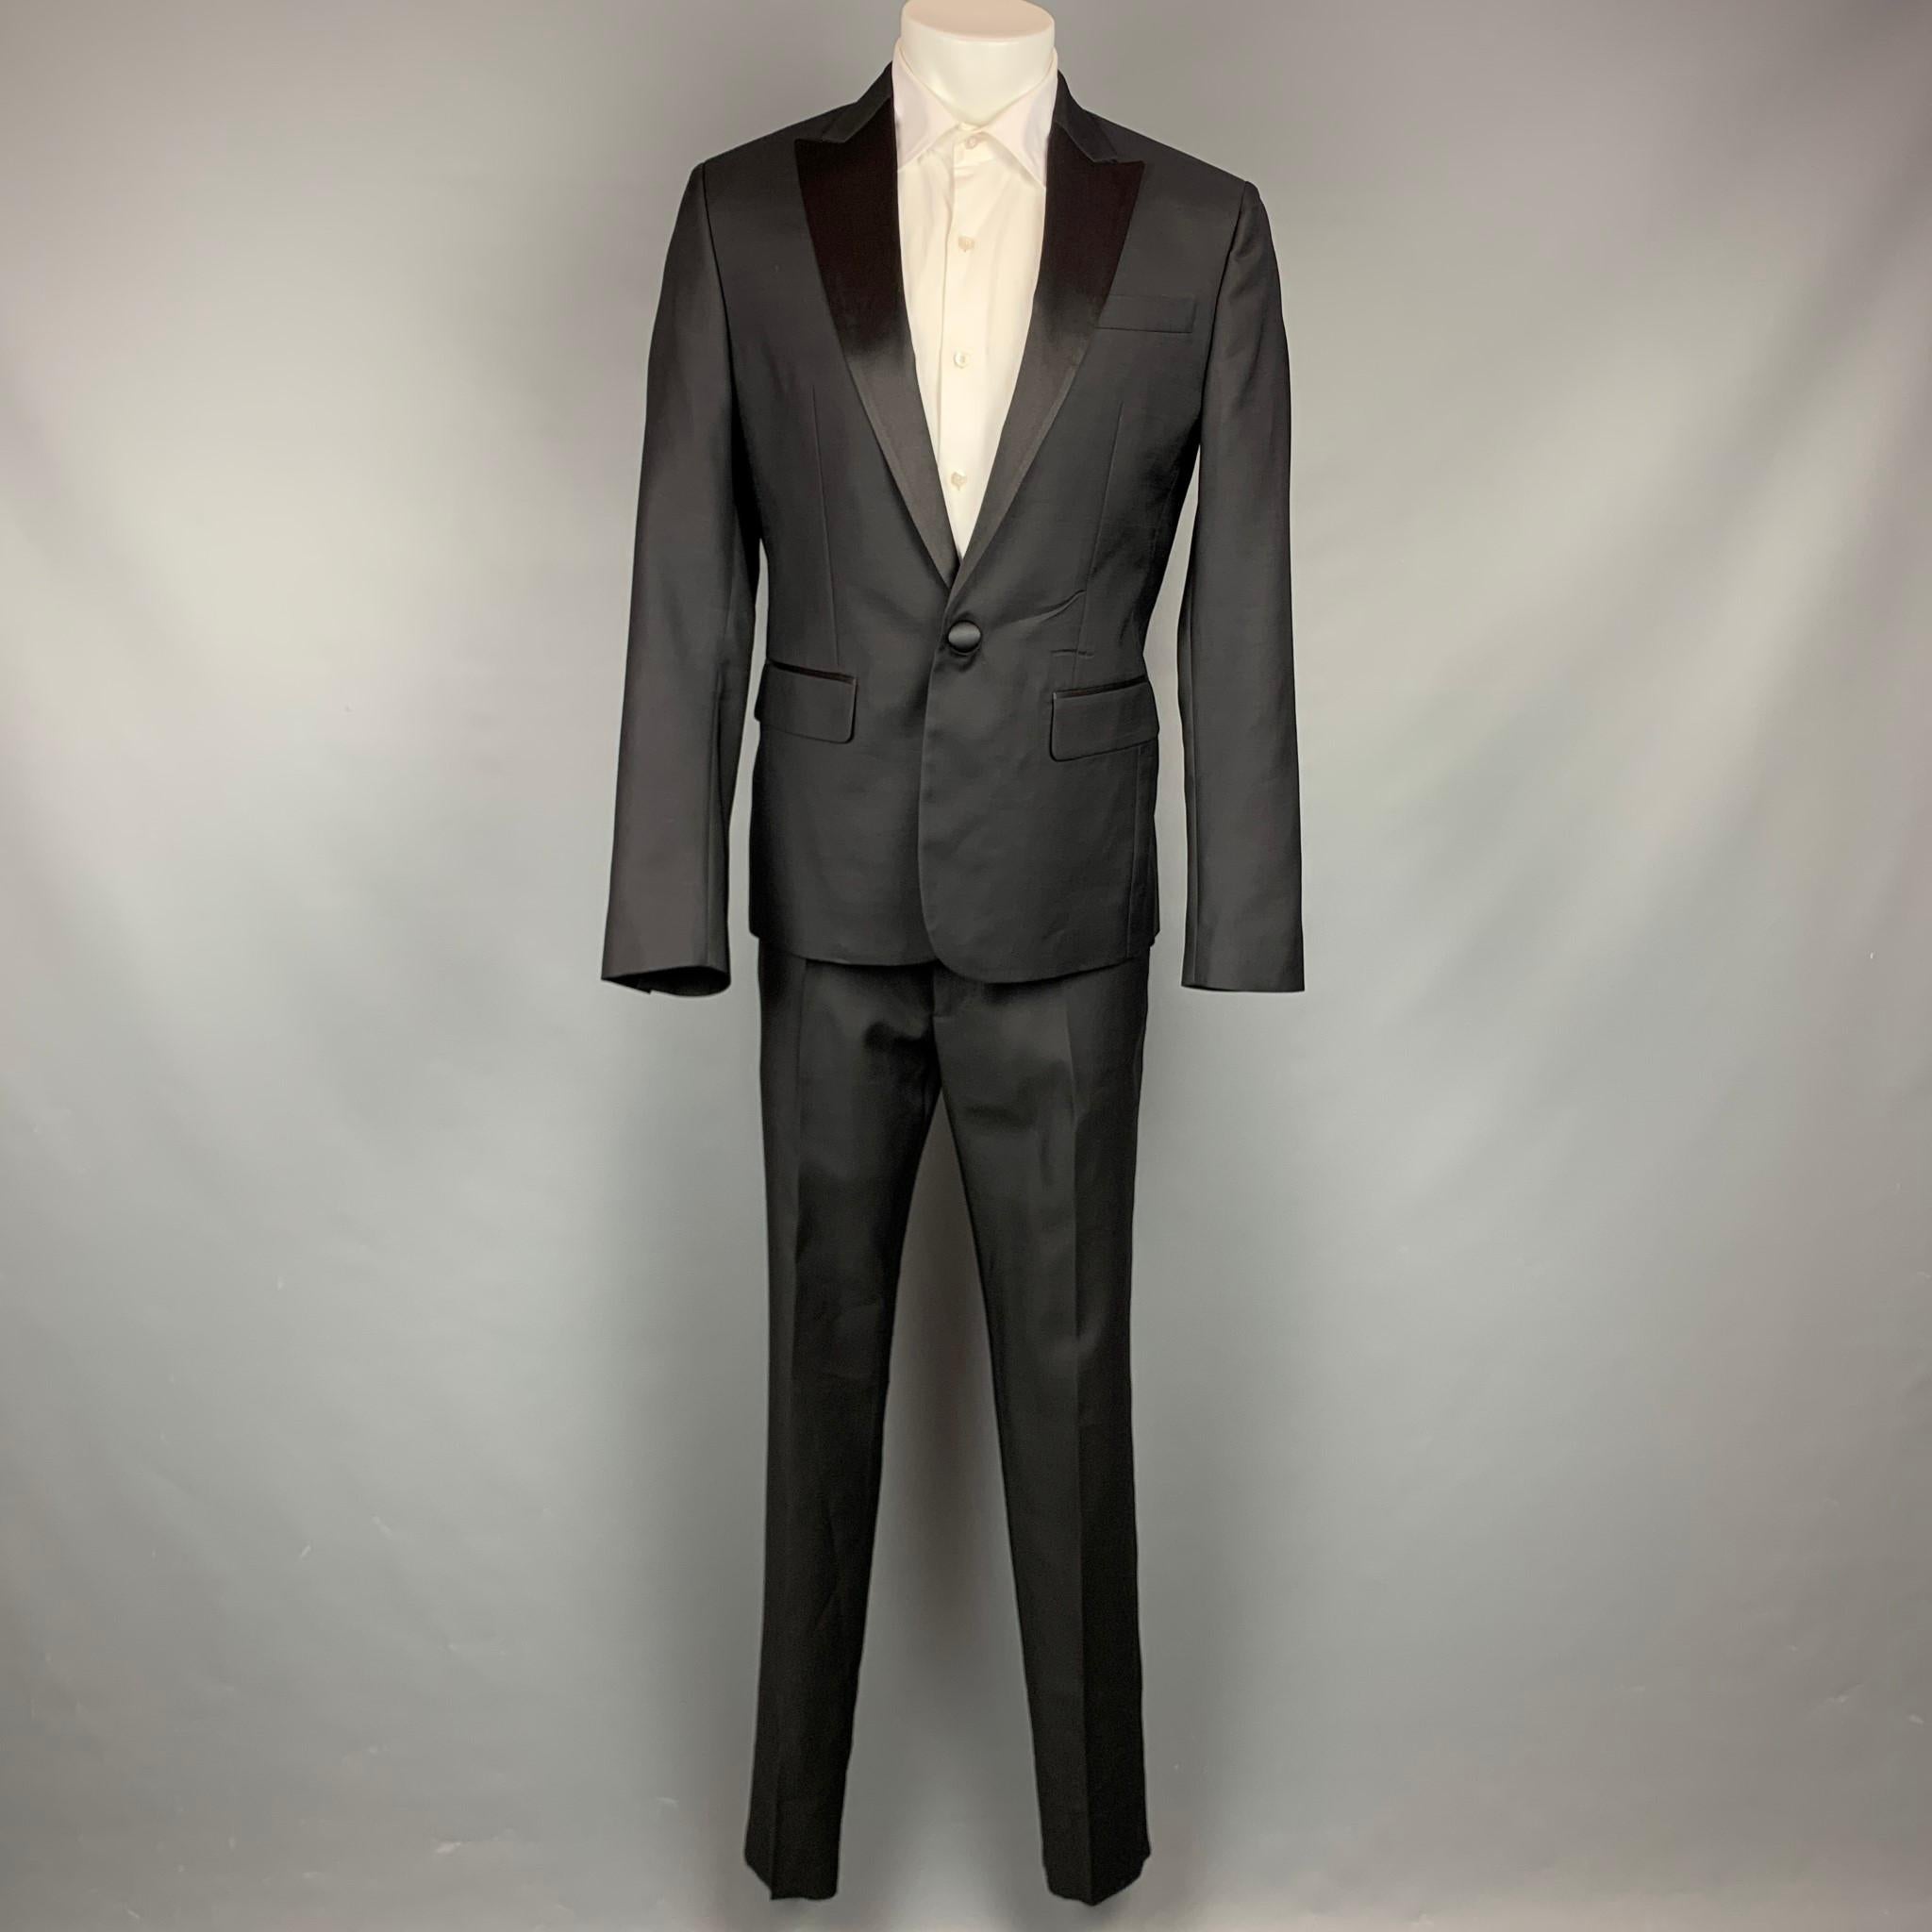 DSQUARED2 suit comes in a black wool / silk with a full liner and includes a single breasted, single button sport coat with a peak lapel and matching flat front trousers. Made in Italy.

Excellent Pre-Owned Condition.
Marked: Jacket: IT 52
Pants: